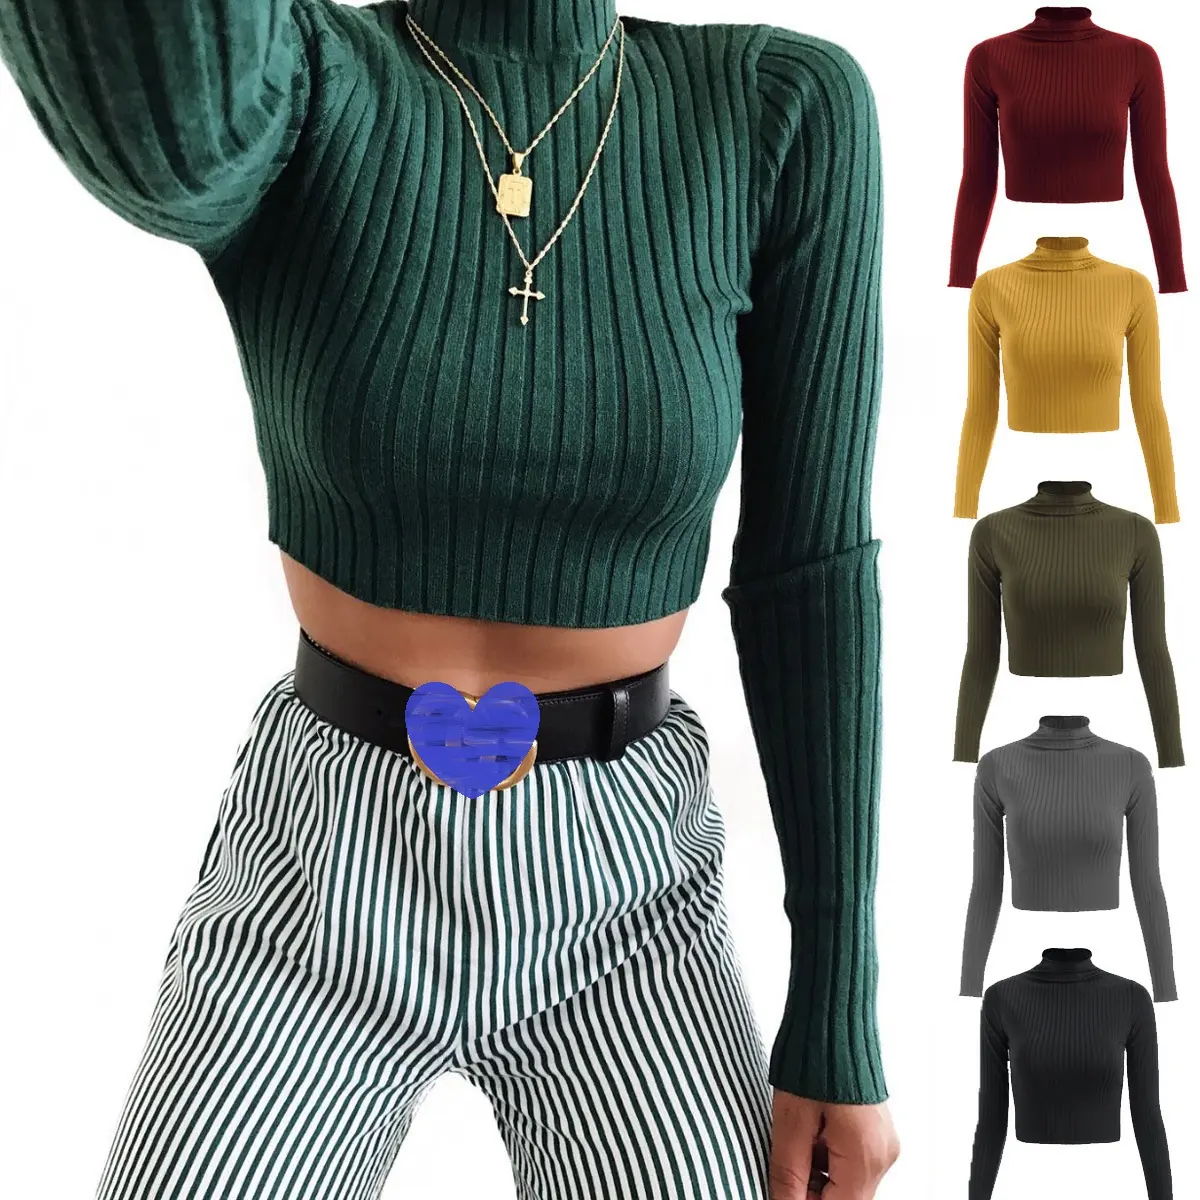 Turtleneck Sweaters Sexy Navel Bare Cropped Tops Women Autumn Winter Ribbed Jumpers Lady Knitted Pullovers Short Solid Sweaters